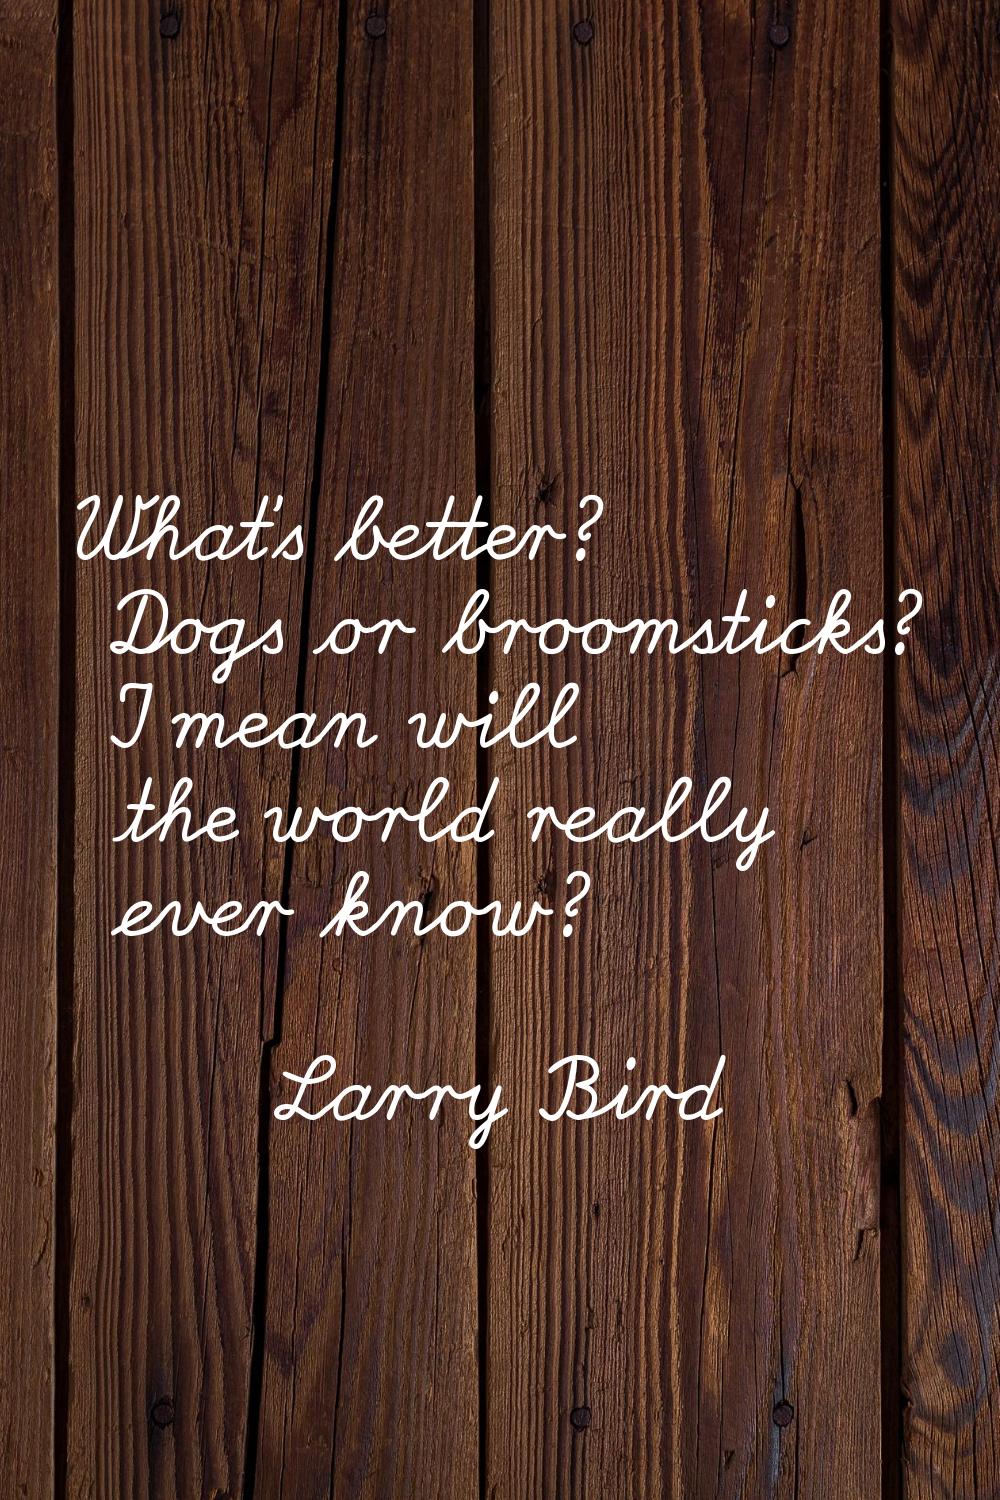 What's better? Dogs or broomsticks? I mean will the world really ever know?